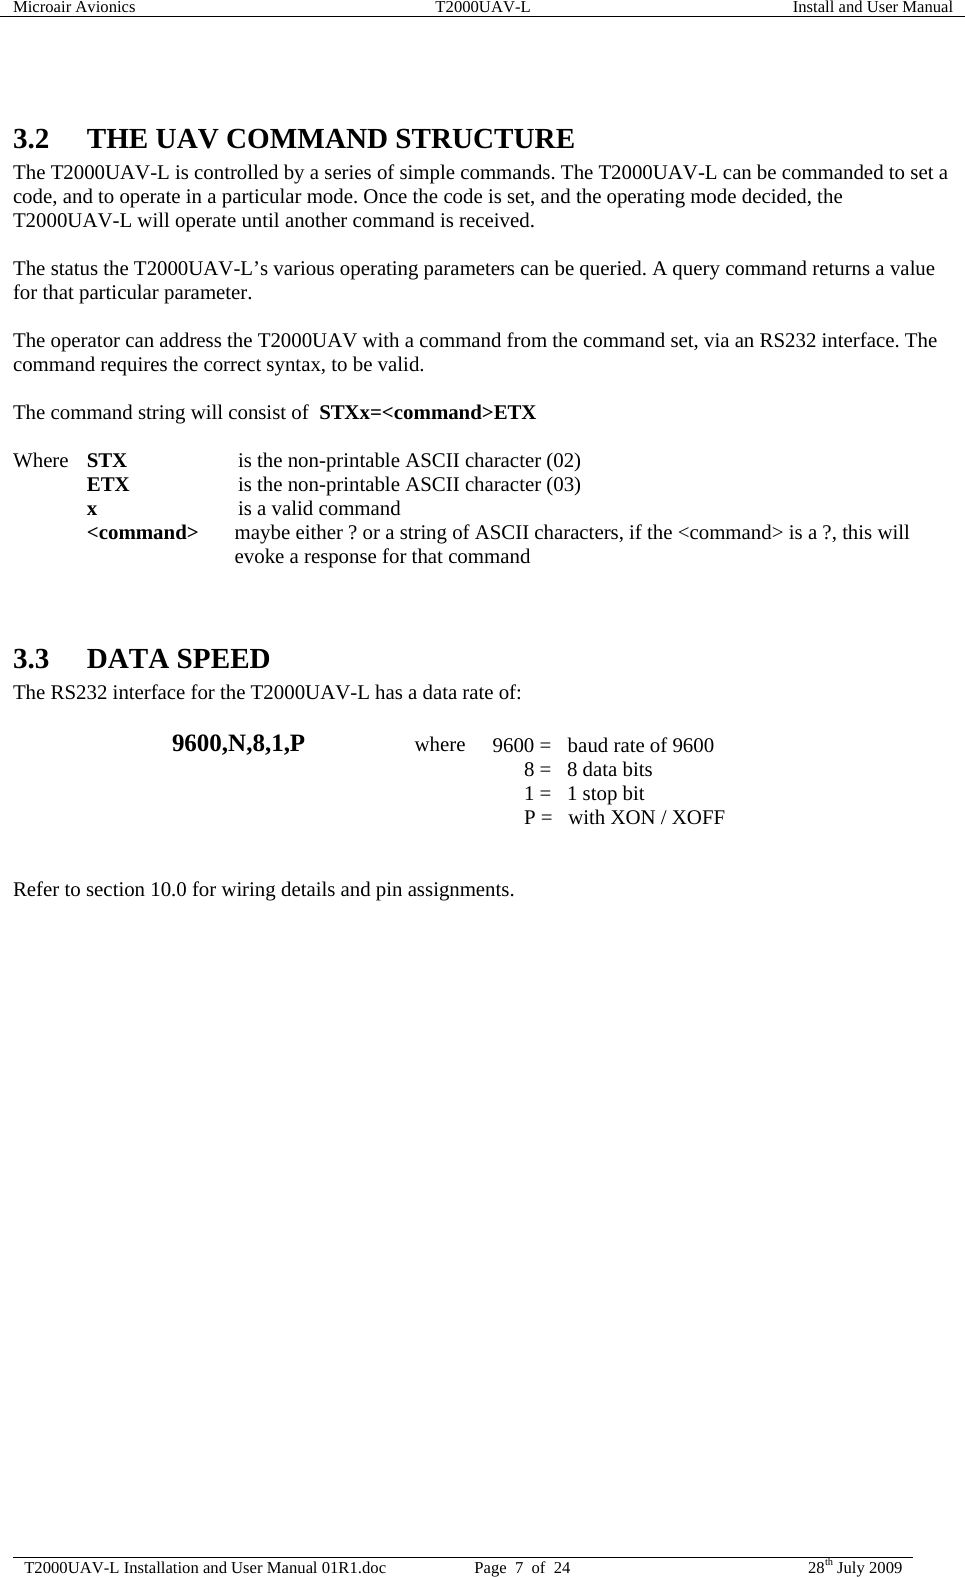 Microair Avionics  T2000UAV-L  Install and User Manual  T2000UAV-L Installation and User Manual 01R1.doc  Page  7  of  24  28th July 2009   3.2 THE UAV COMMAND STRUCTURE The T2000UAV-L is controlled by a series of simple commands. The T2000UAV-L can be commanded to set a code, and to operate in a particular mode. Once the code is set, and the operating mode decided, the T2000UAV-L will operate until another command is received.  The status the T2000UAV-L’s various operating parameters can be queried. A query command returns a value for that particular parameter.  The operator can address the T2000UAV with a command from the command set, via an RS232 interface. The command requires the correct syntax, to be valid.   The command string will consist of  STXx=&lt;command&gt;ETX   Where STX   is the non-printable ASCII character (02)  ETX   is the non-printable ASCII character (03)  x   is a valid command  &lt;command&gt;  maybe either ? or a string of ASCII characters, if the &lt;command&gt; is a ?, this will evoke a response for that command   3.3 DATA SPEED The RS232 interface for the T2000UAV-L has a data rate of:   9600,N,8,1,P                     where  9600 =  baud rate of 9600           8 =   8 data bits           1 =   1 stop bit           P =   with XON / XOFF   Refer to section 10.0 for wiring details and pin assignments.